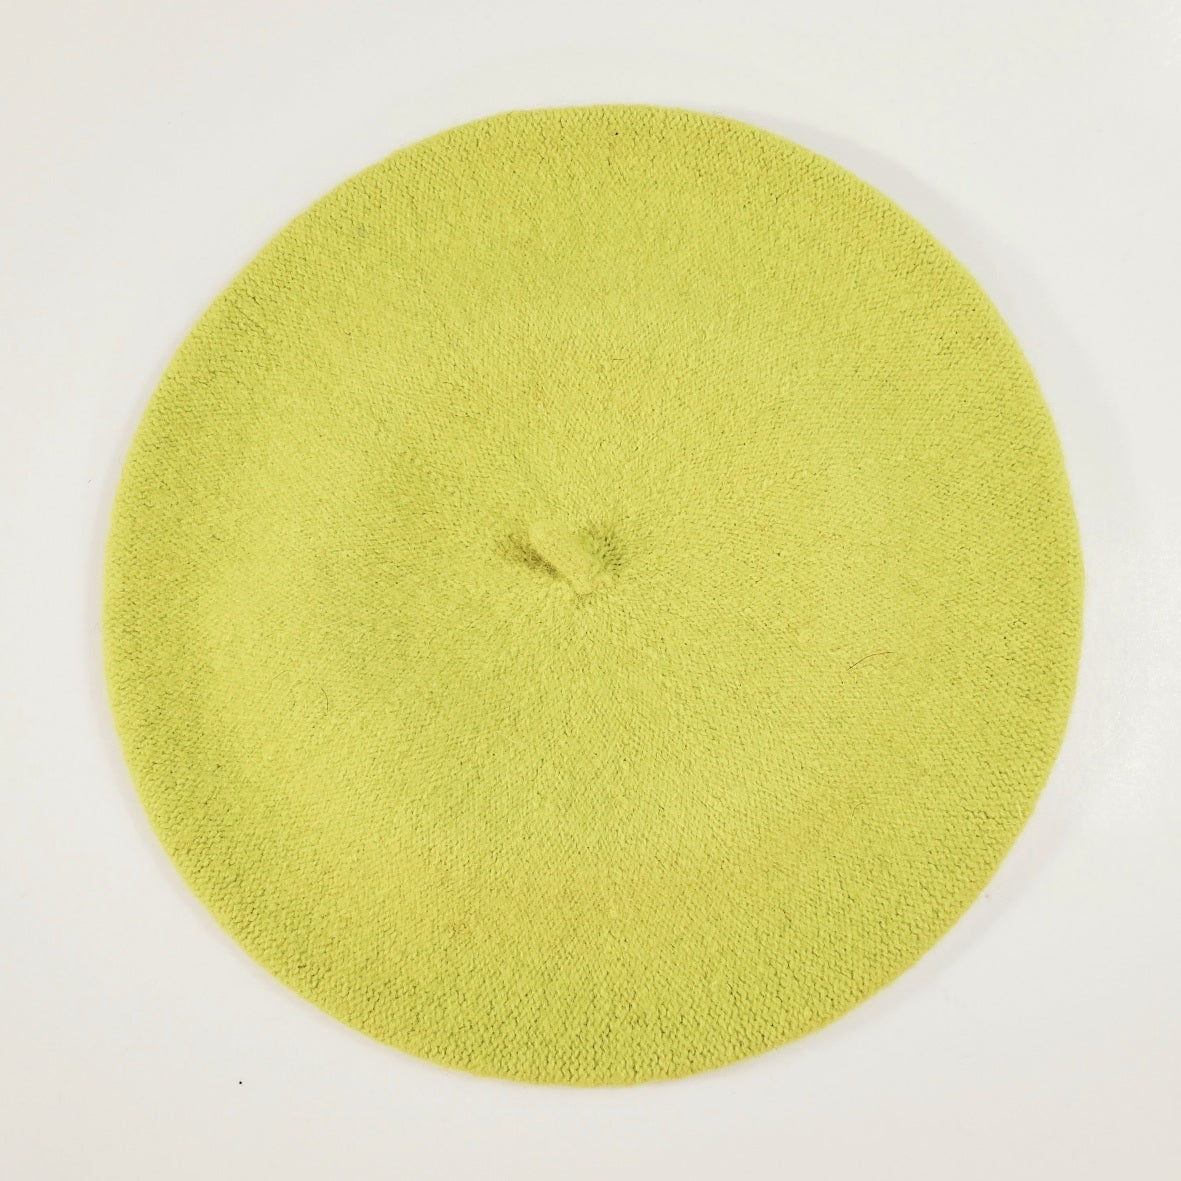 11" diameter "French" style wool blend knit beret in chartreuse green